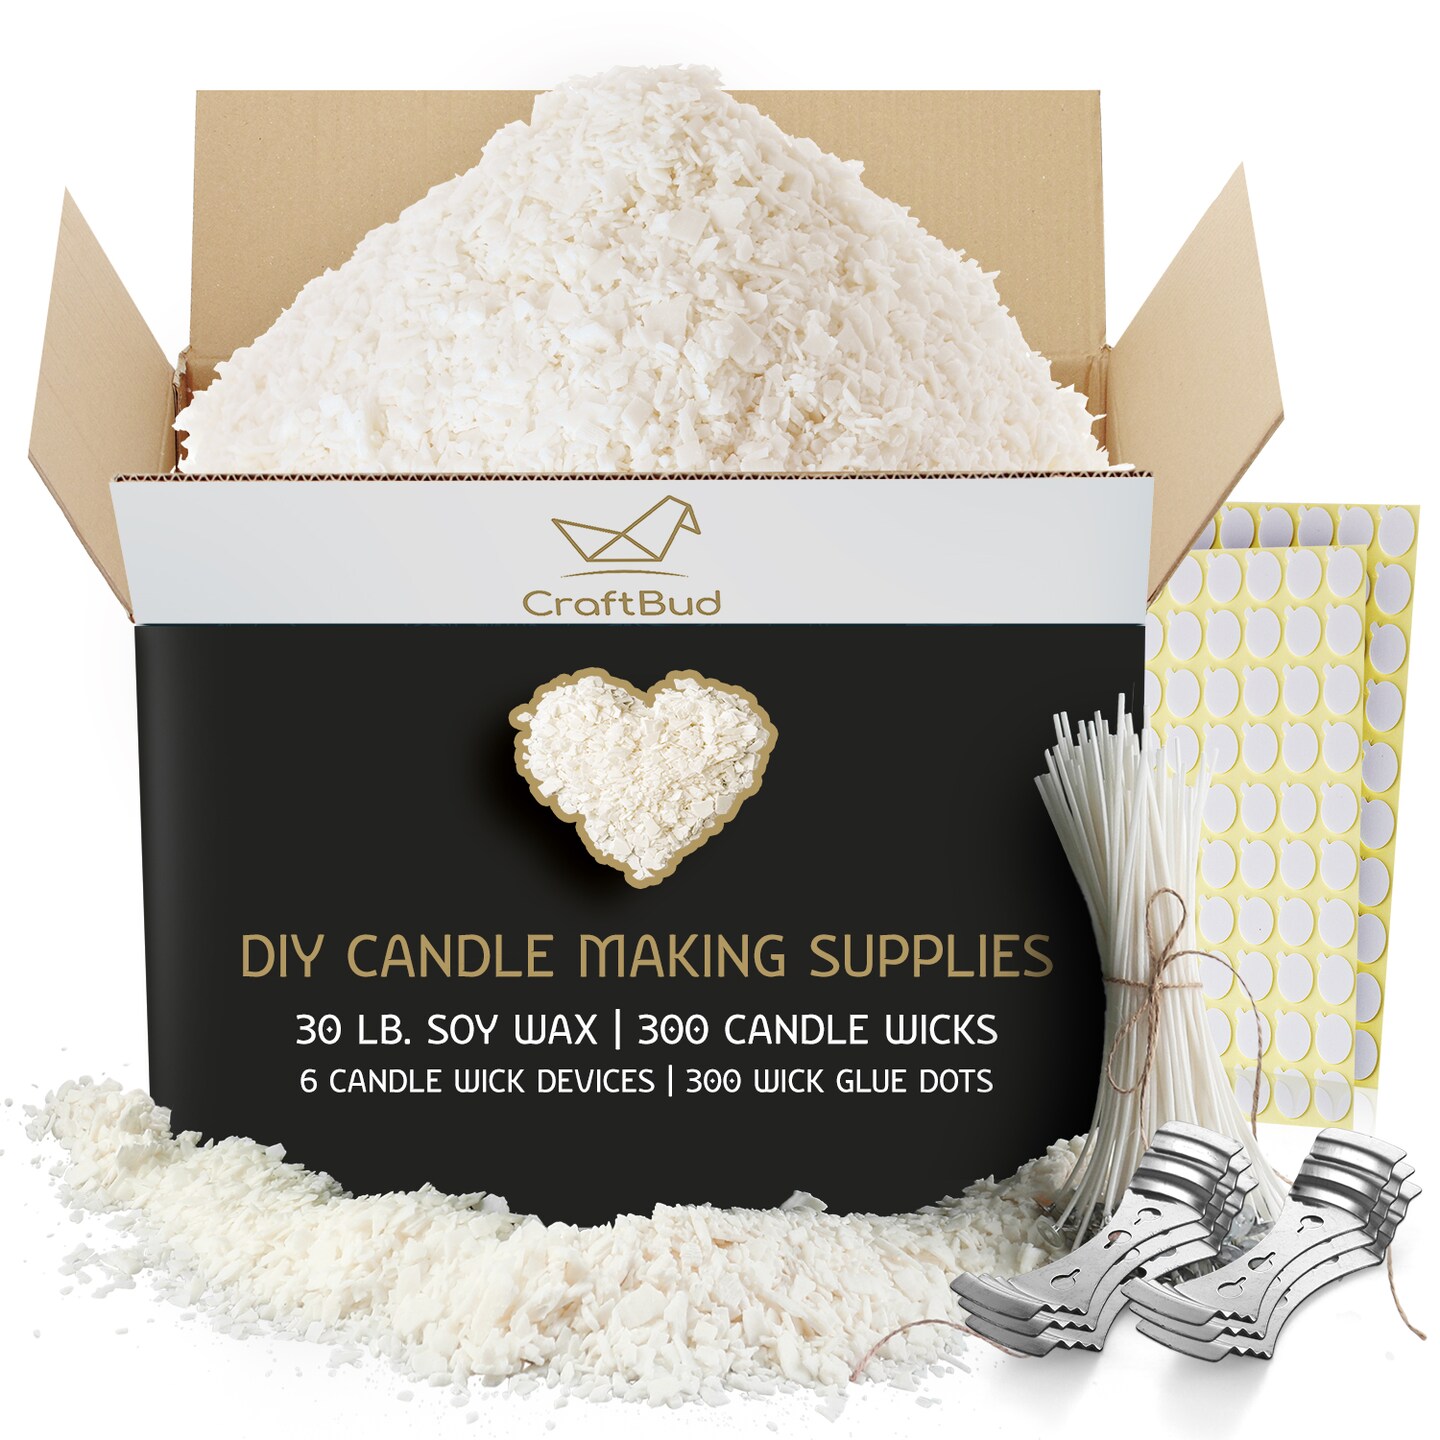 7lb. Gel Candle Wax by Make Market®